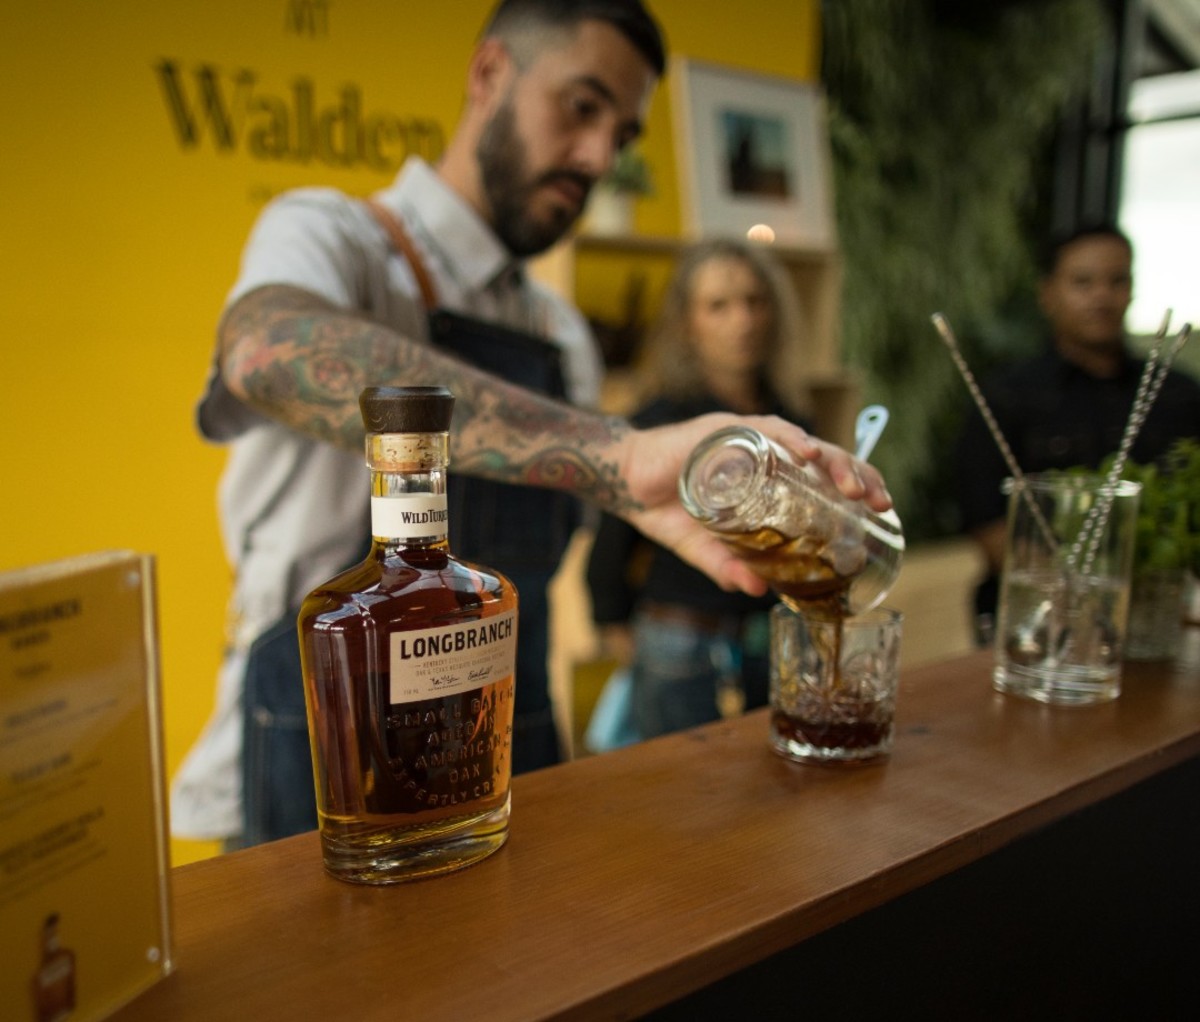 Bartender with tattooed arm pouring cocktail into glass with bottle of Longbranch whiskey on bar